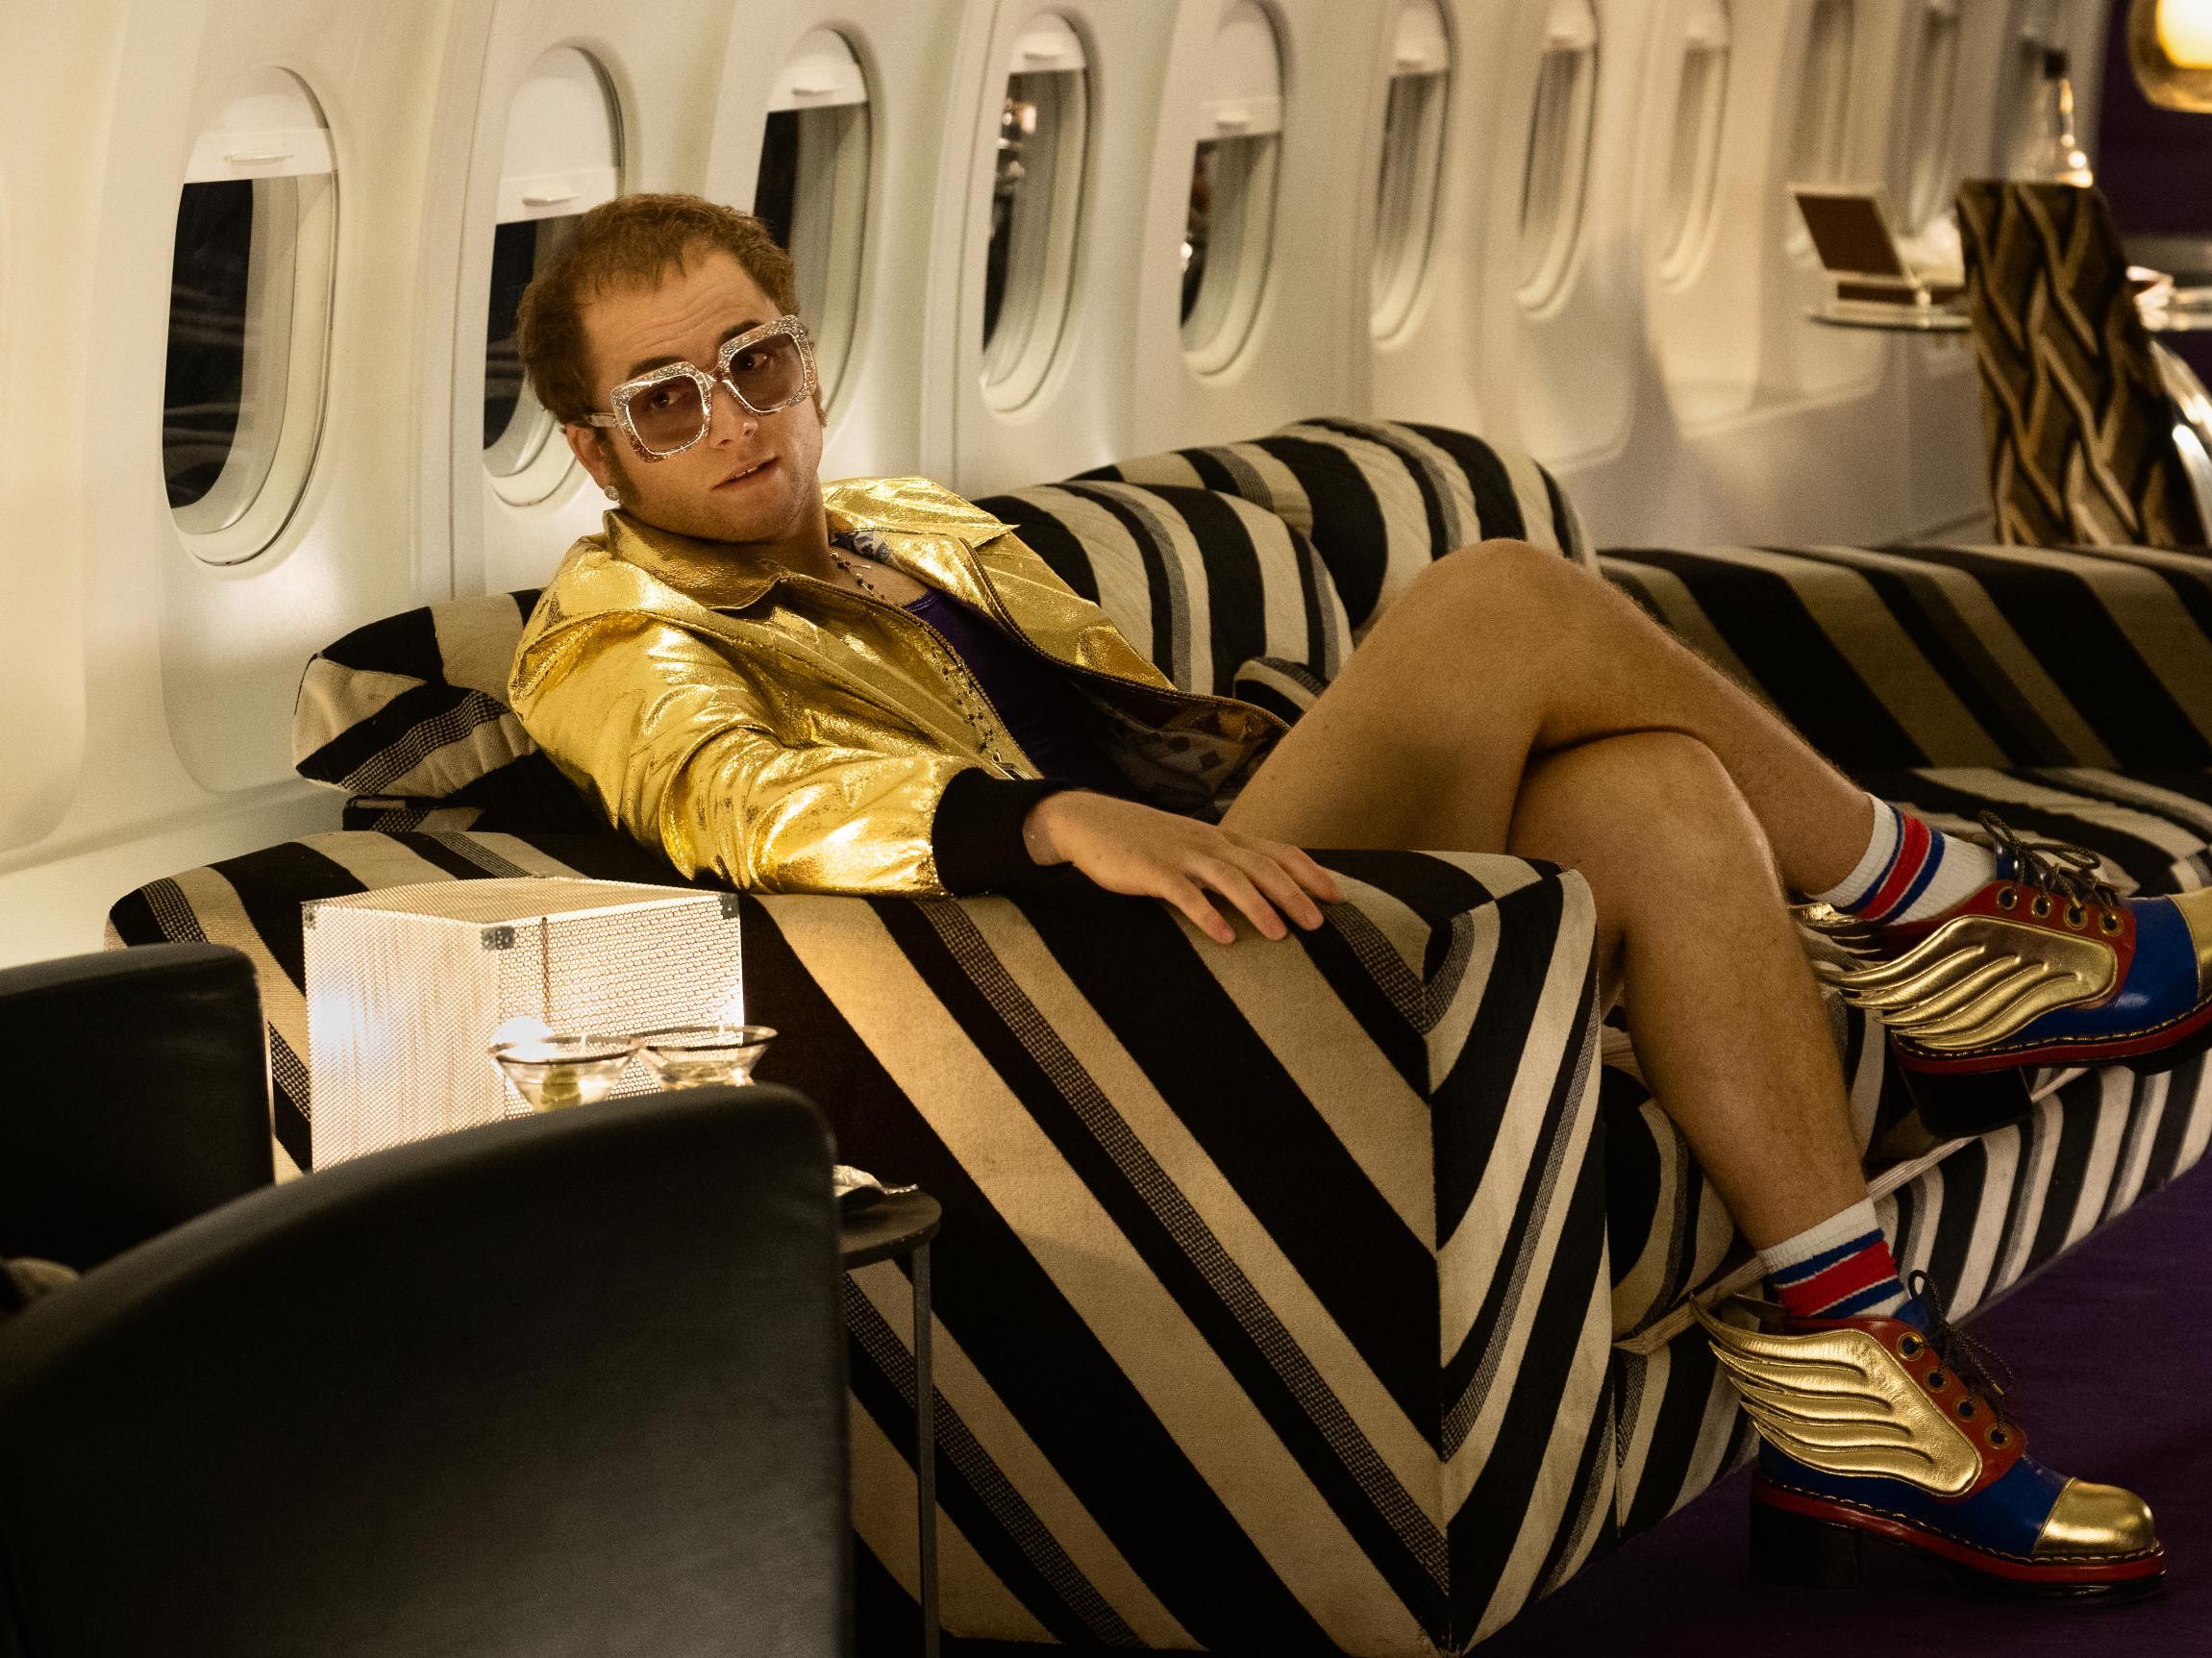 Success comes very quickly but happiness doesn’t for Elton John, played by Taron Egerton, in the biopic